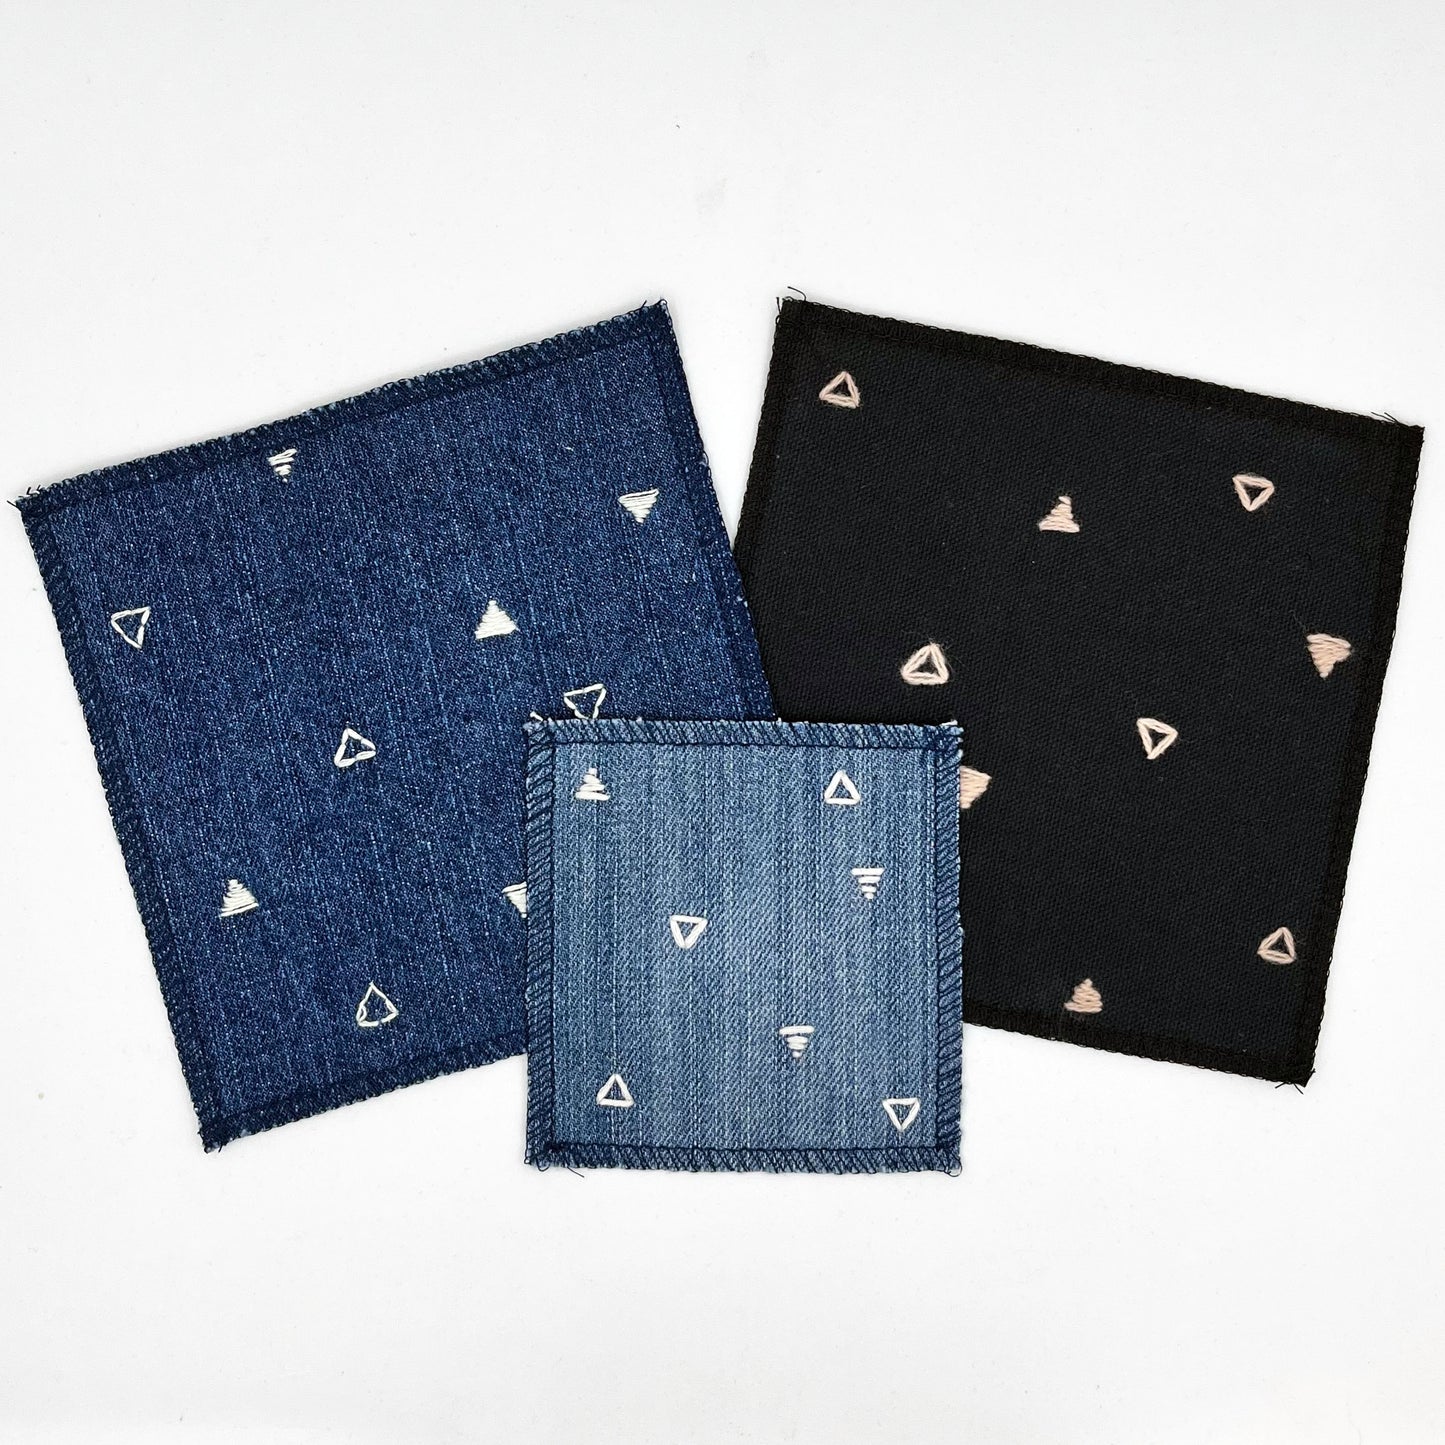 a group of square patches made out of denim and black canvas, hand stitched with scattered ivory or peach triangles, some as outlines some with a line fill, with overlocked edges, on a white background